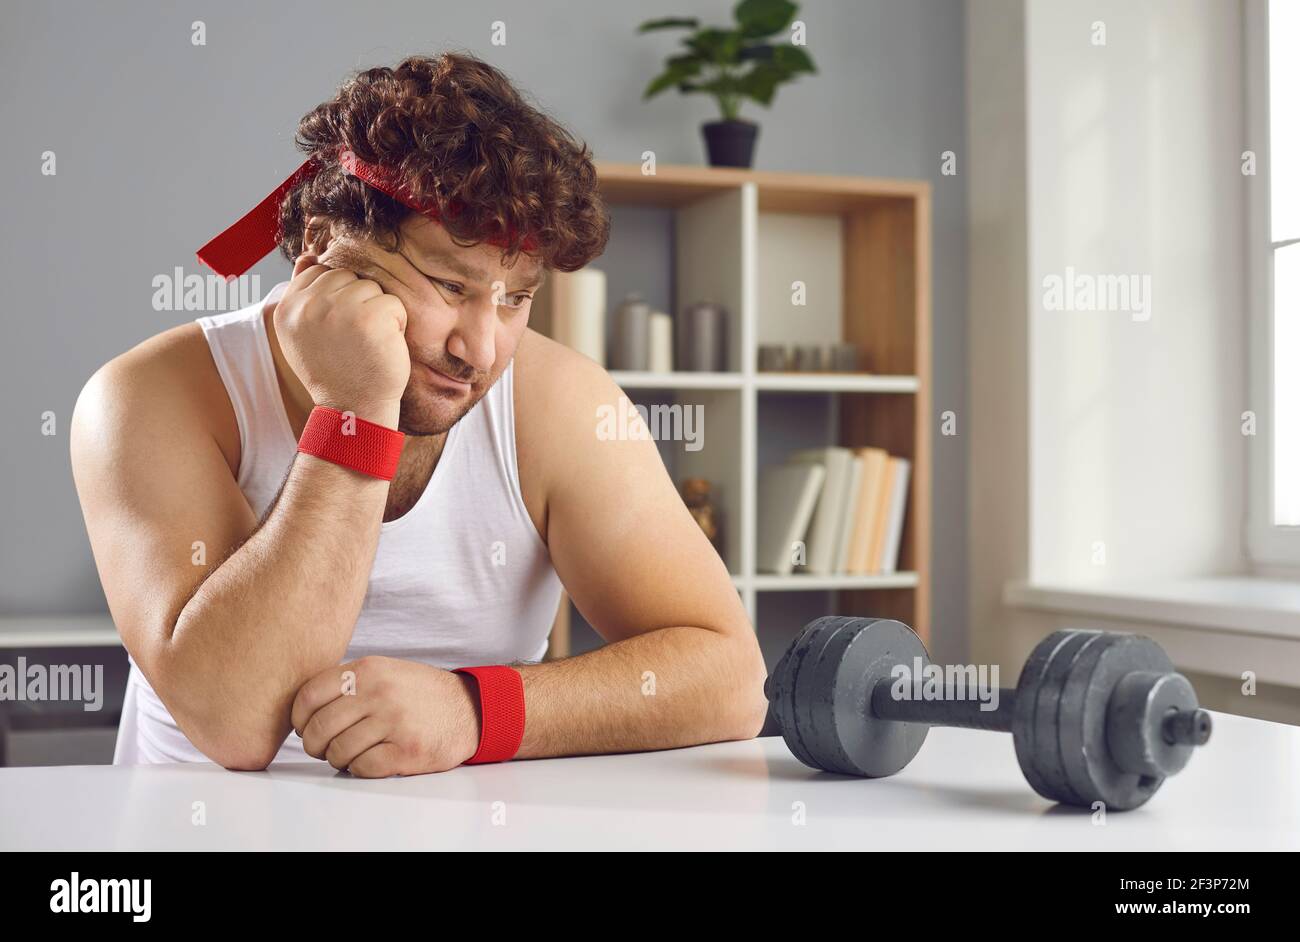 Funny fat man looking at small barbell unsure whether he needs to start training Stock Photo